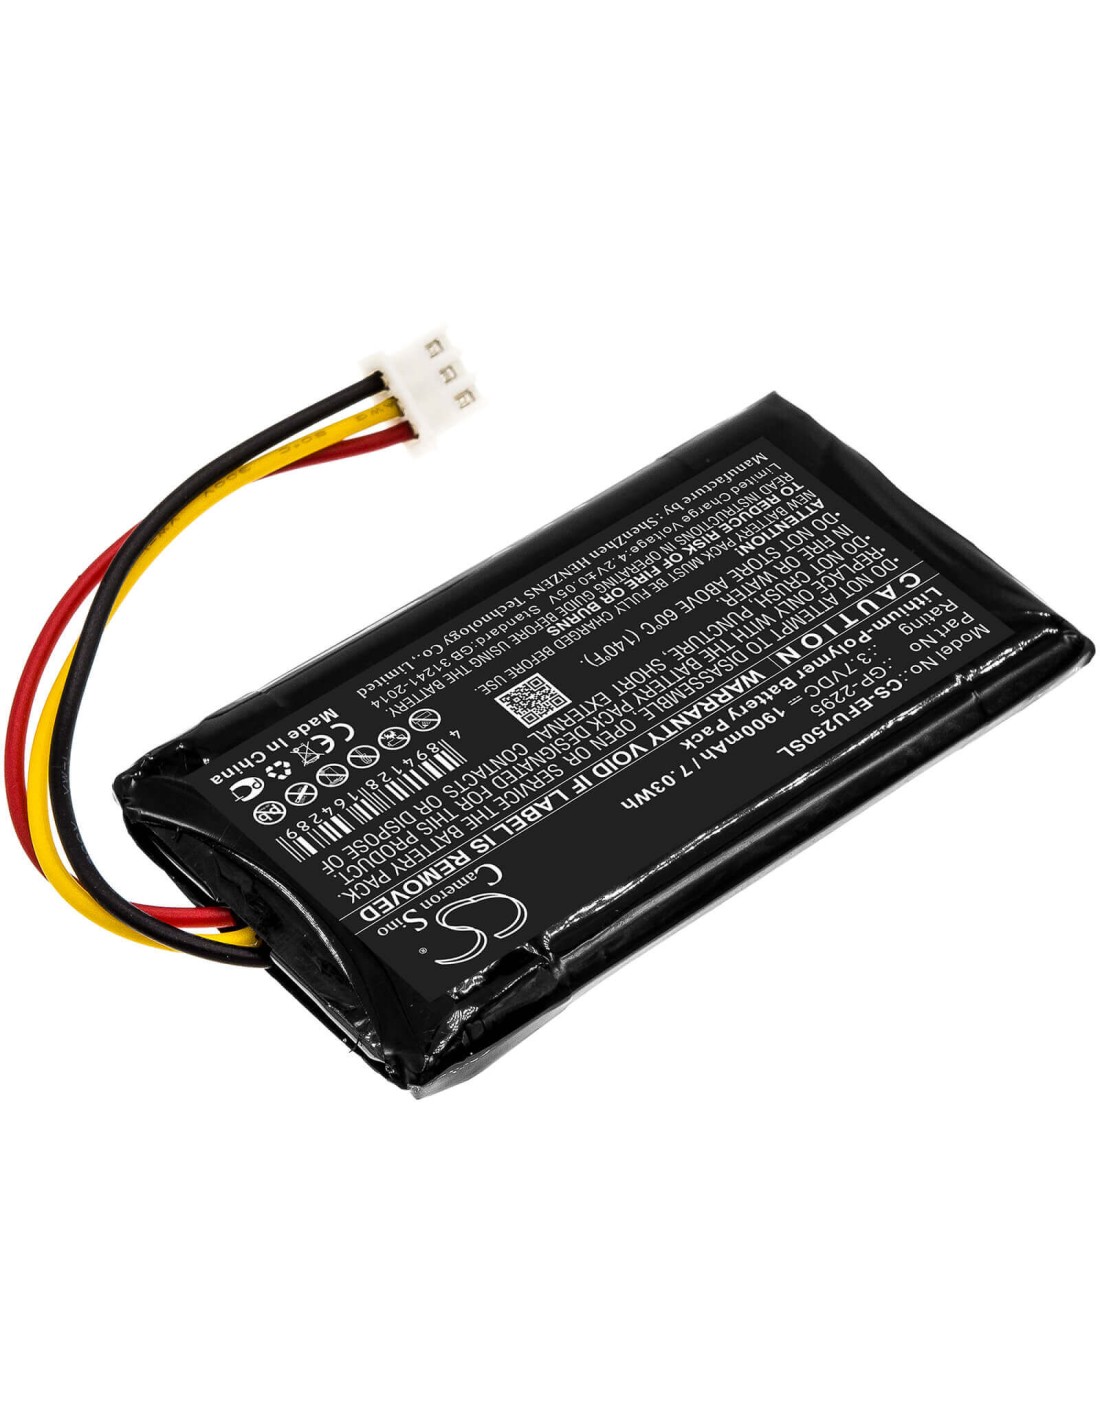 Battery for Exfo, Px1, Px1-h-pro-foas-u25, Px1-s-pro-foas-u25 3.7V, 1900mAh - 7.03Wh